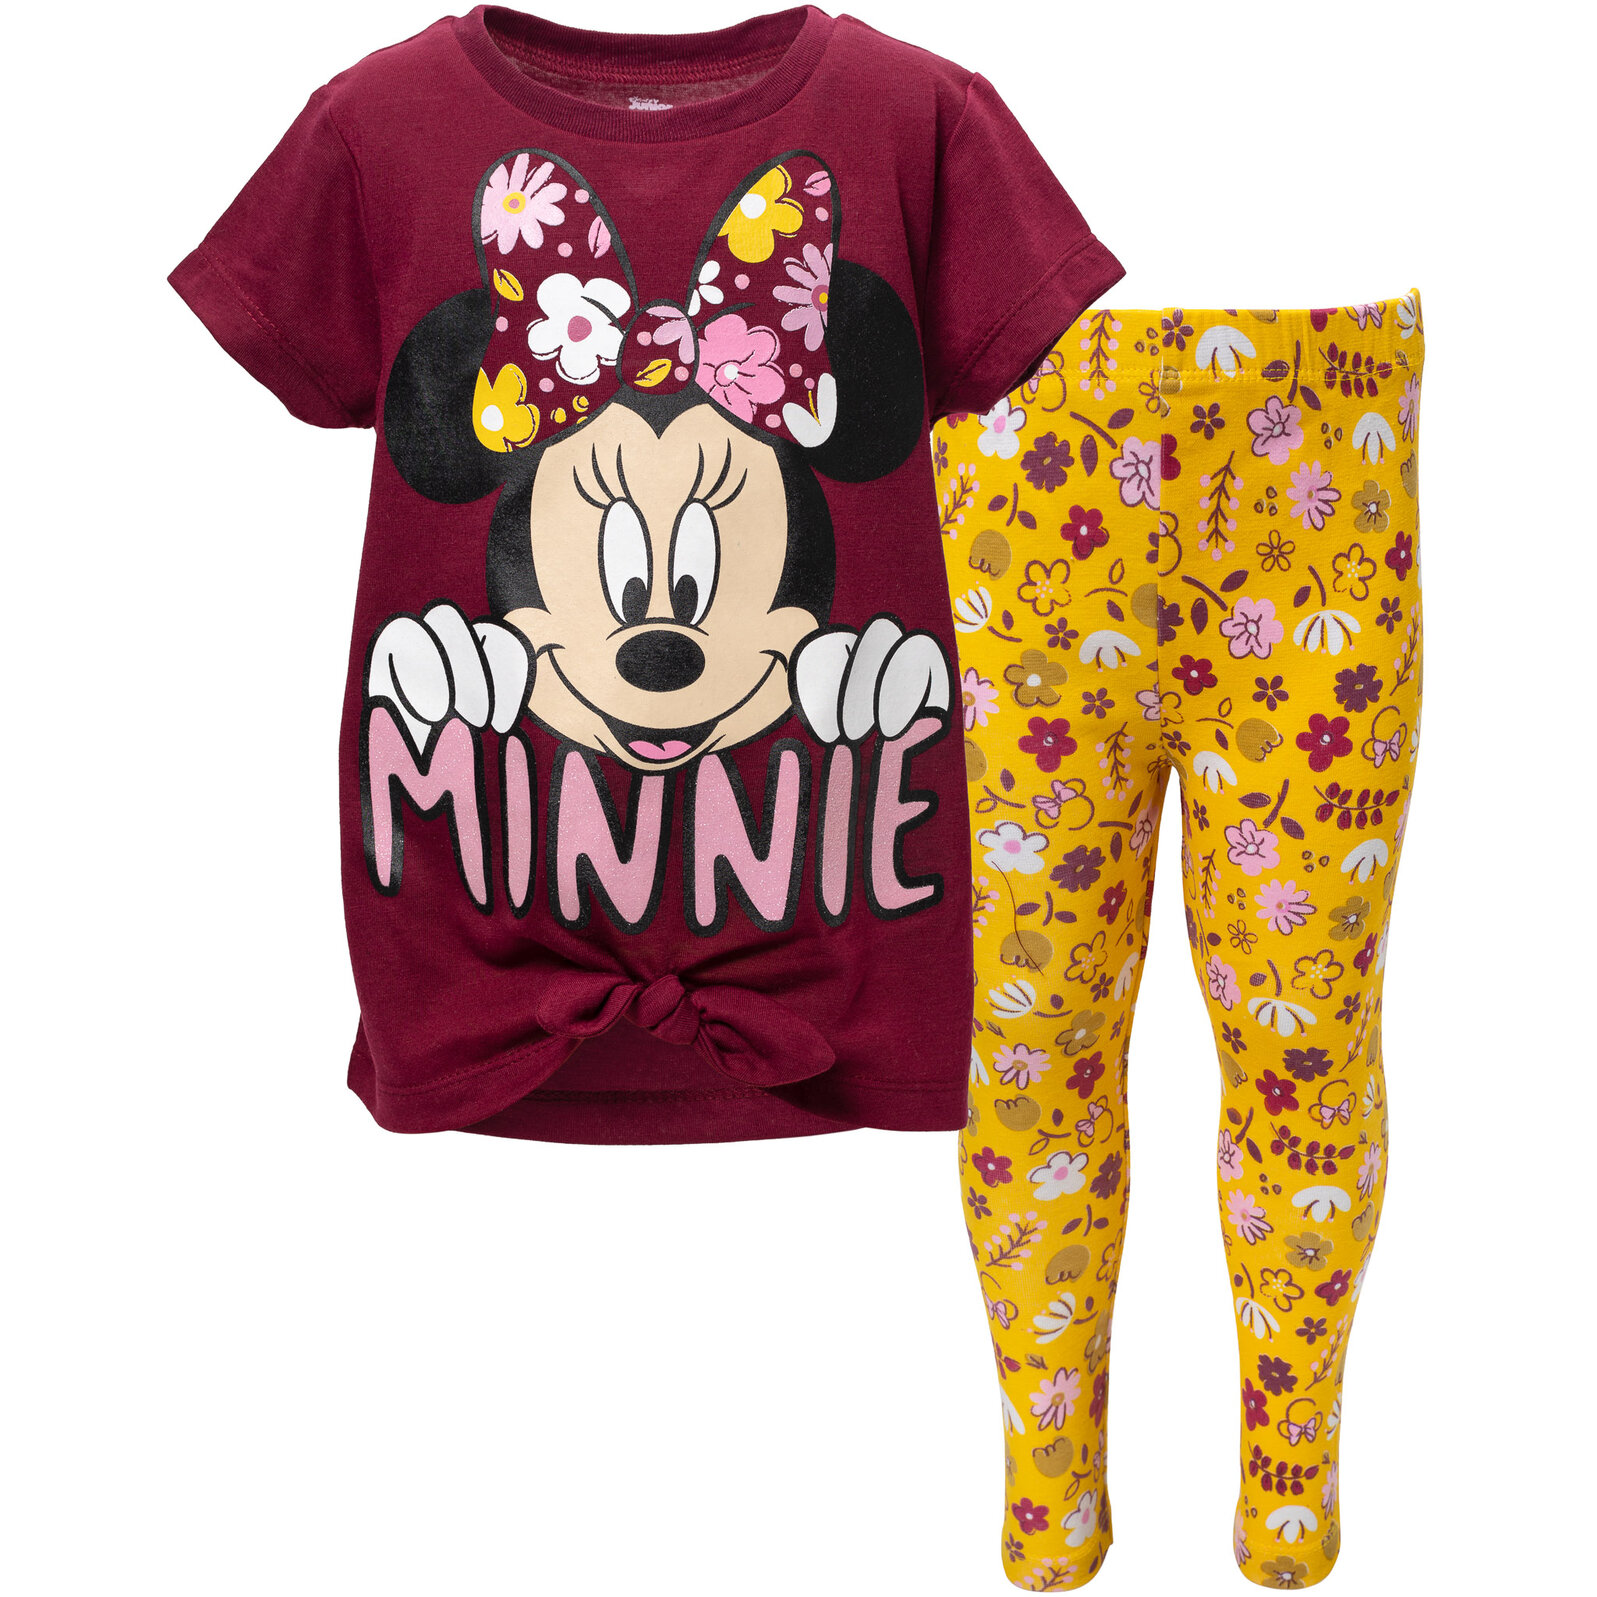 Disney Minnie Mouse Little Girls T-Shirt and Leggings Outfit Set Infant to Little Kid - image 1 of 5